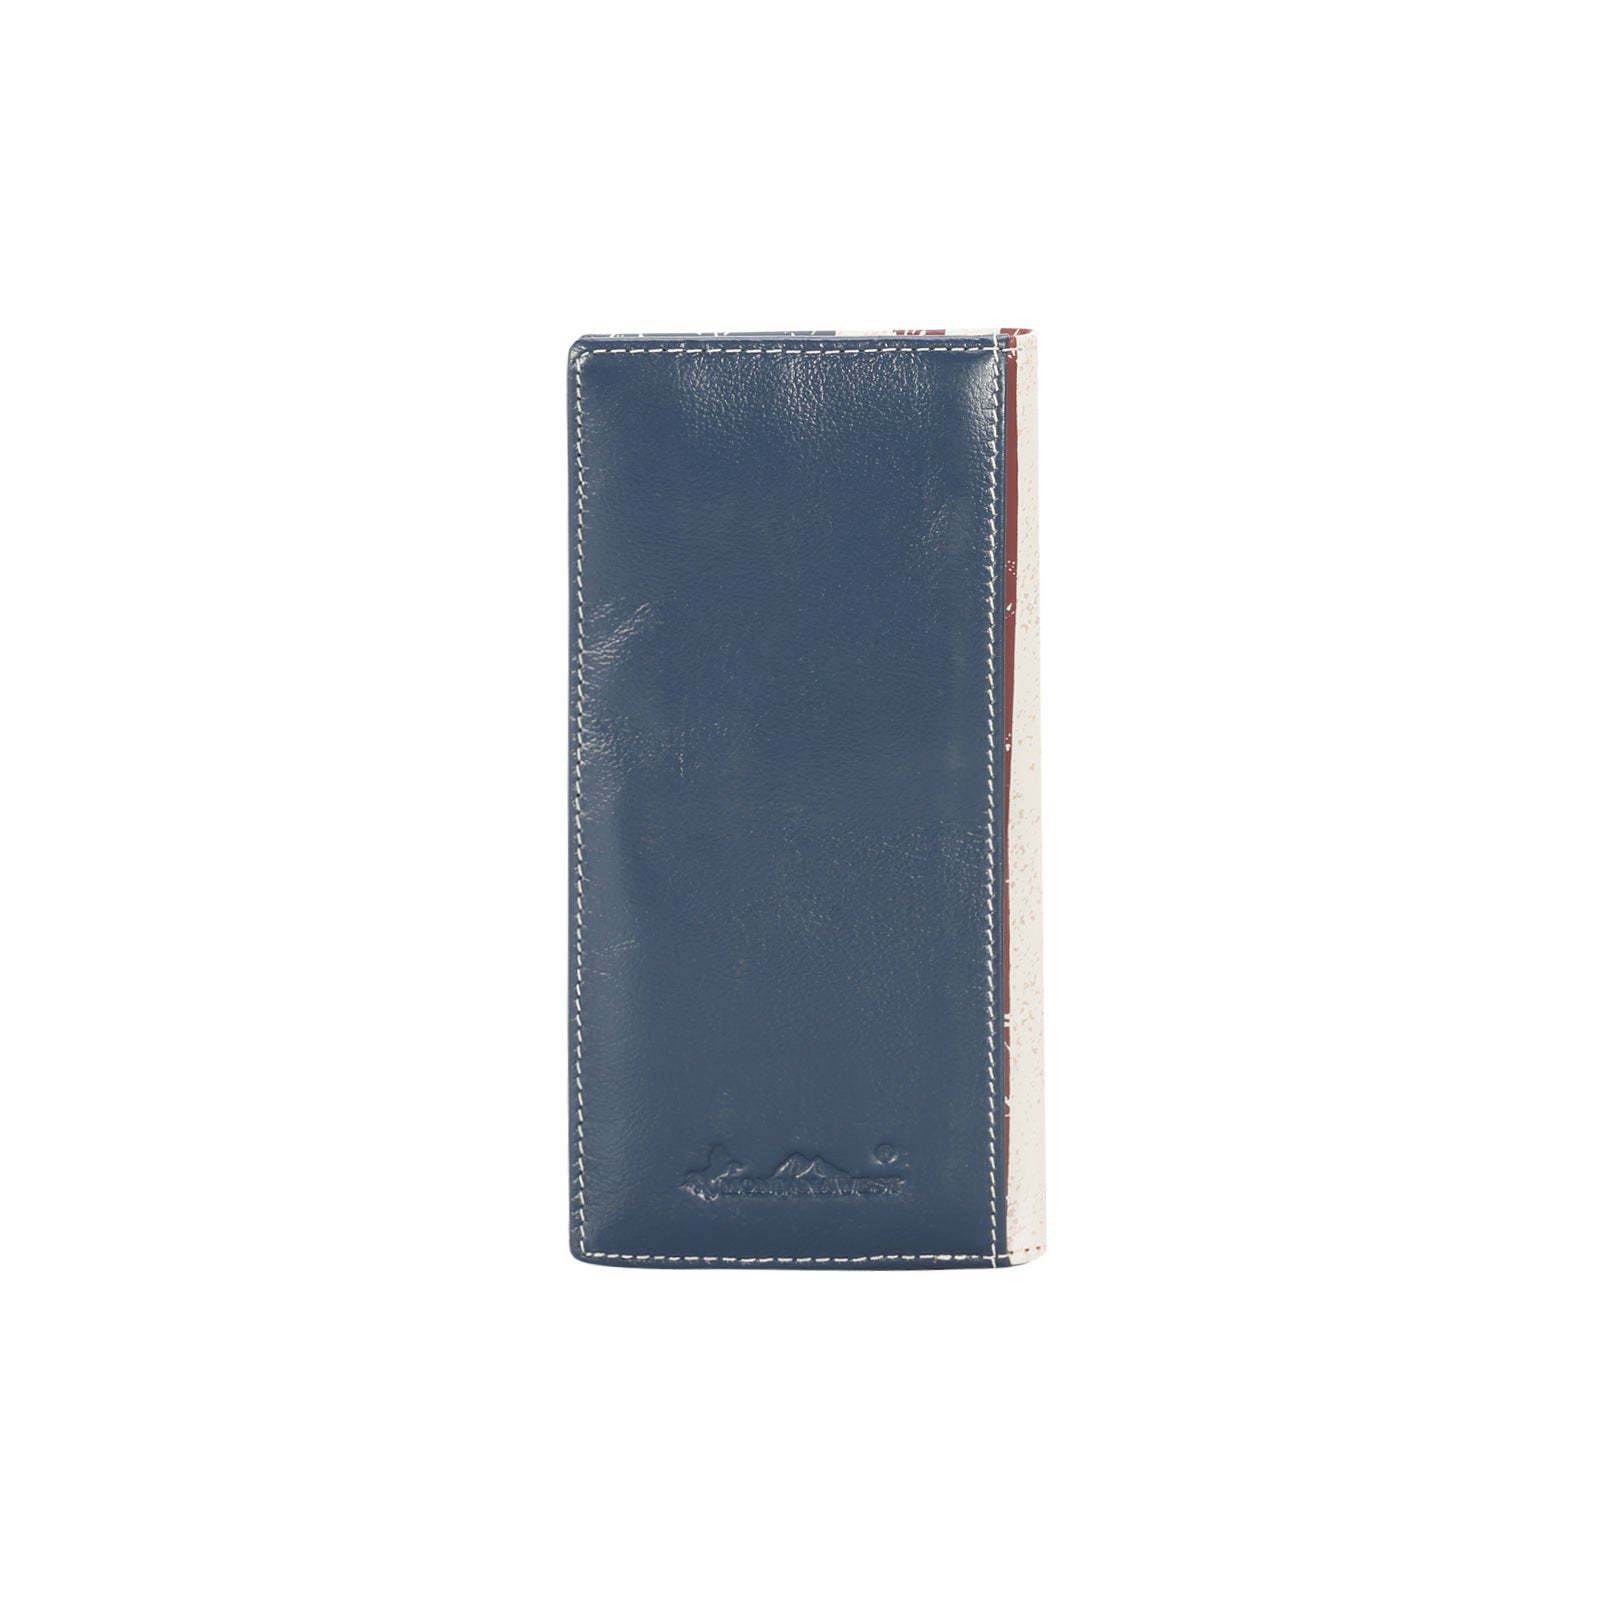 MWL-US01 Genuine Leather Patriotic Collection Men's Wallet – MONTANA ...